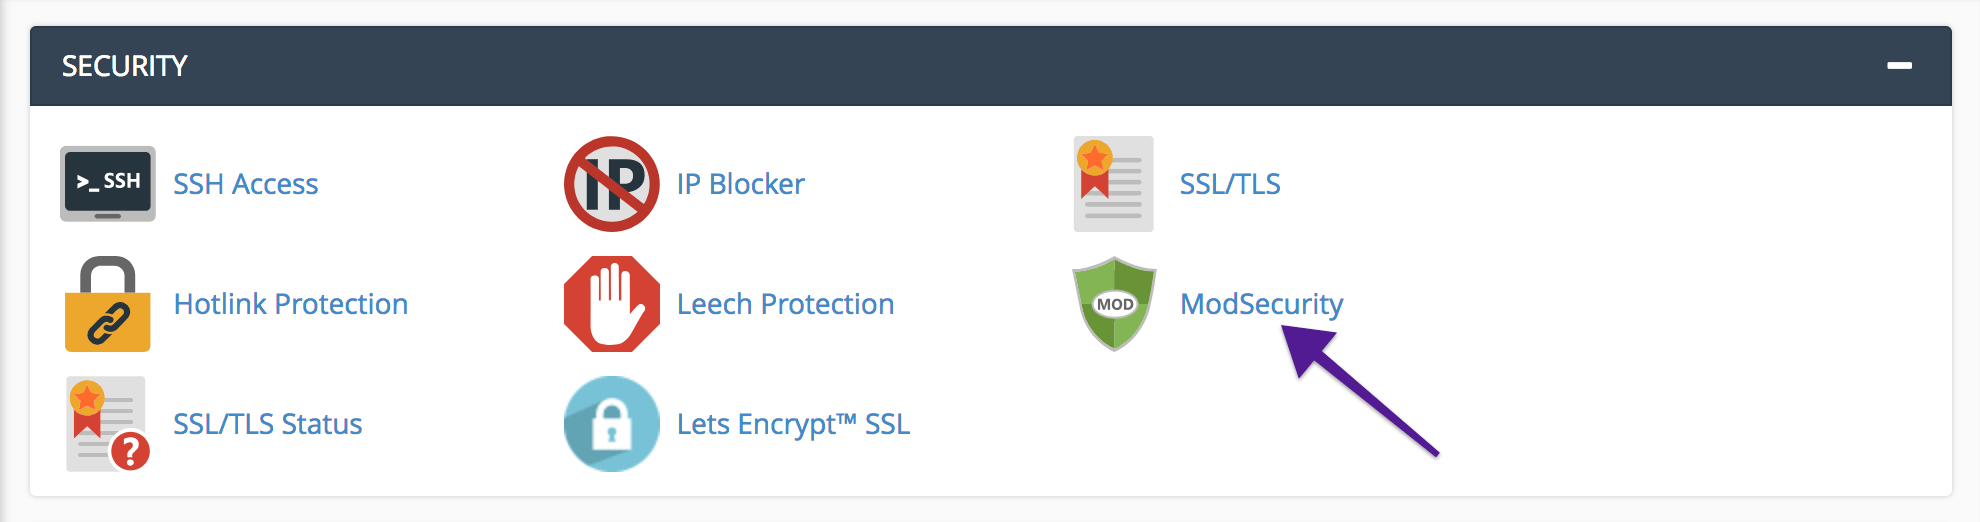 ModSecurity 2